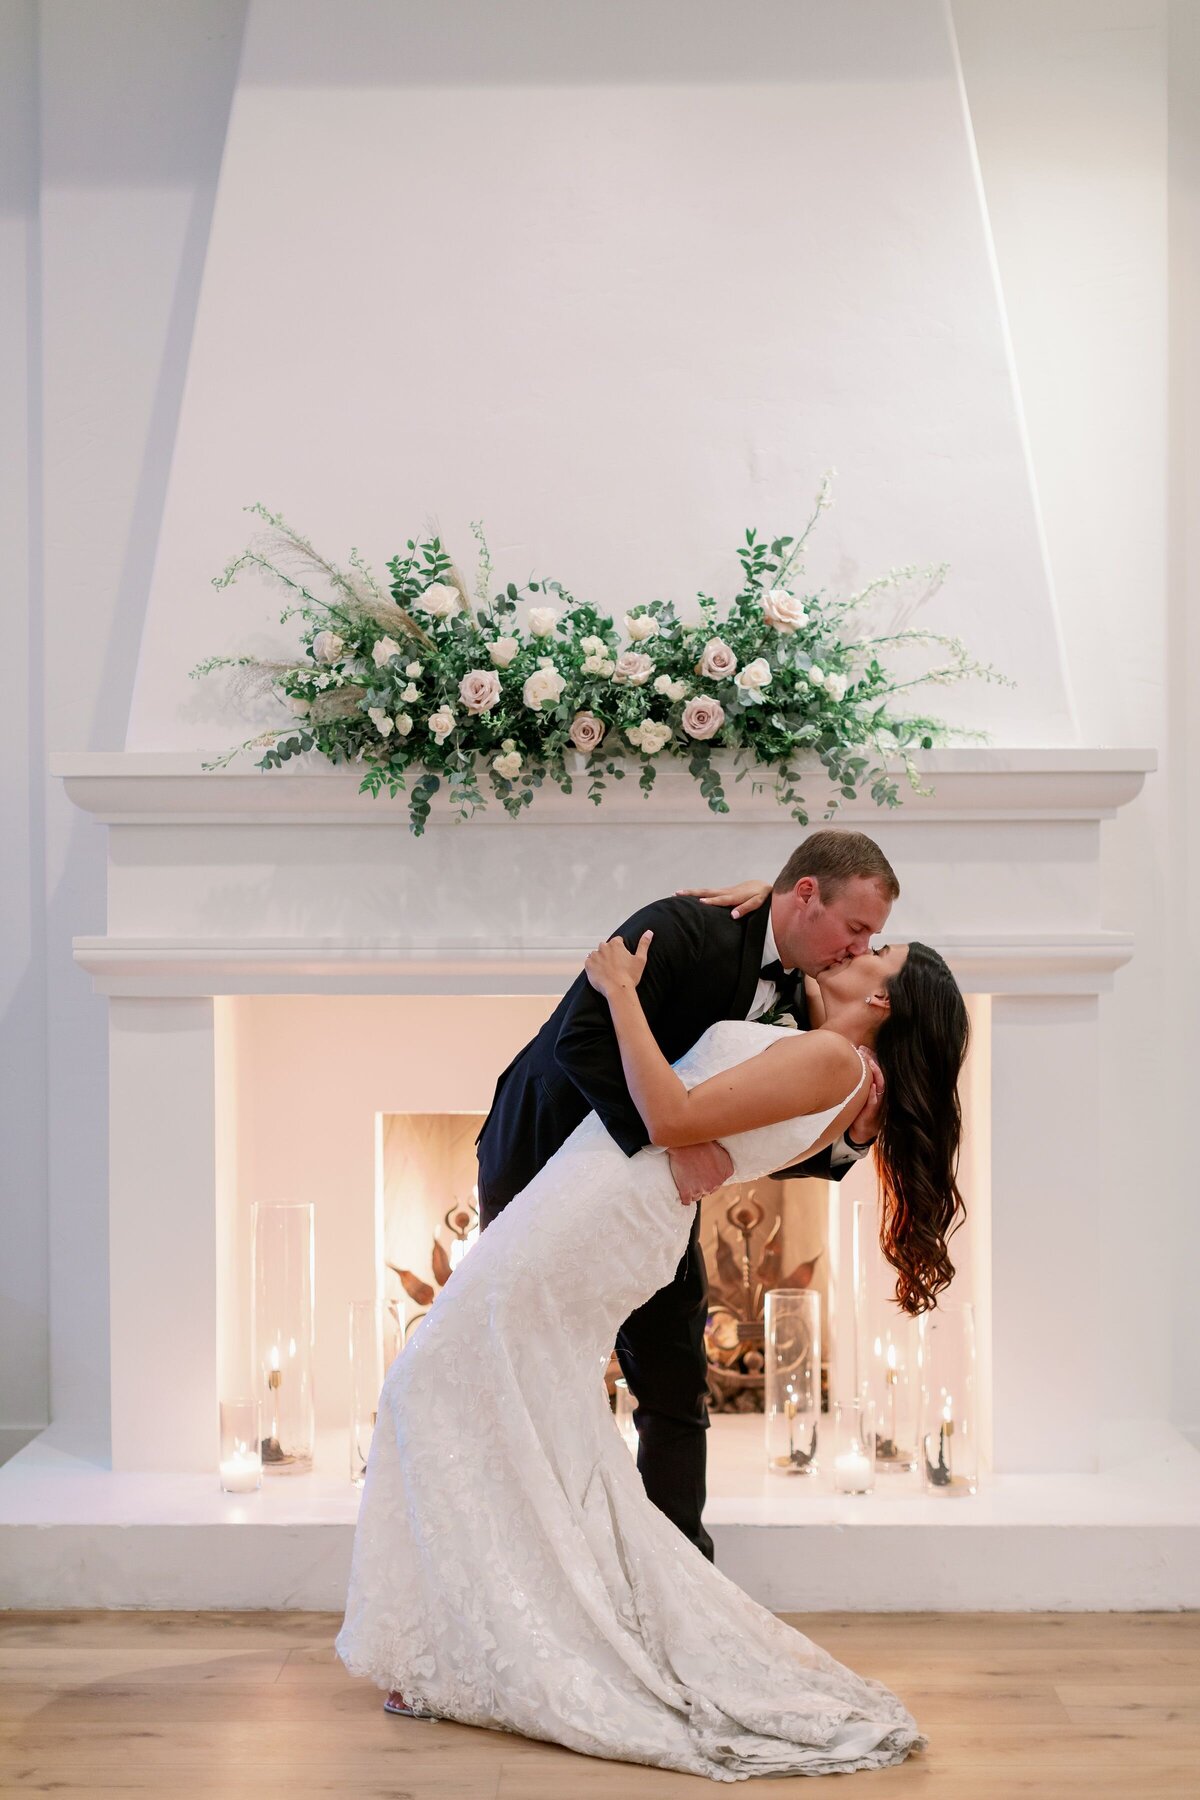 The bride and groom standing in front of a fireplace with a large white floral piece above.